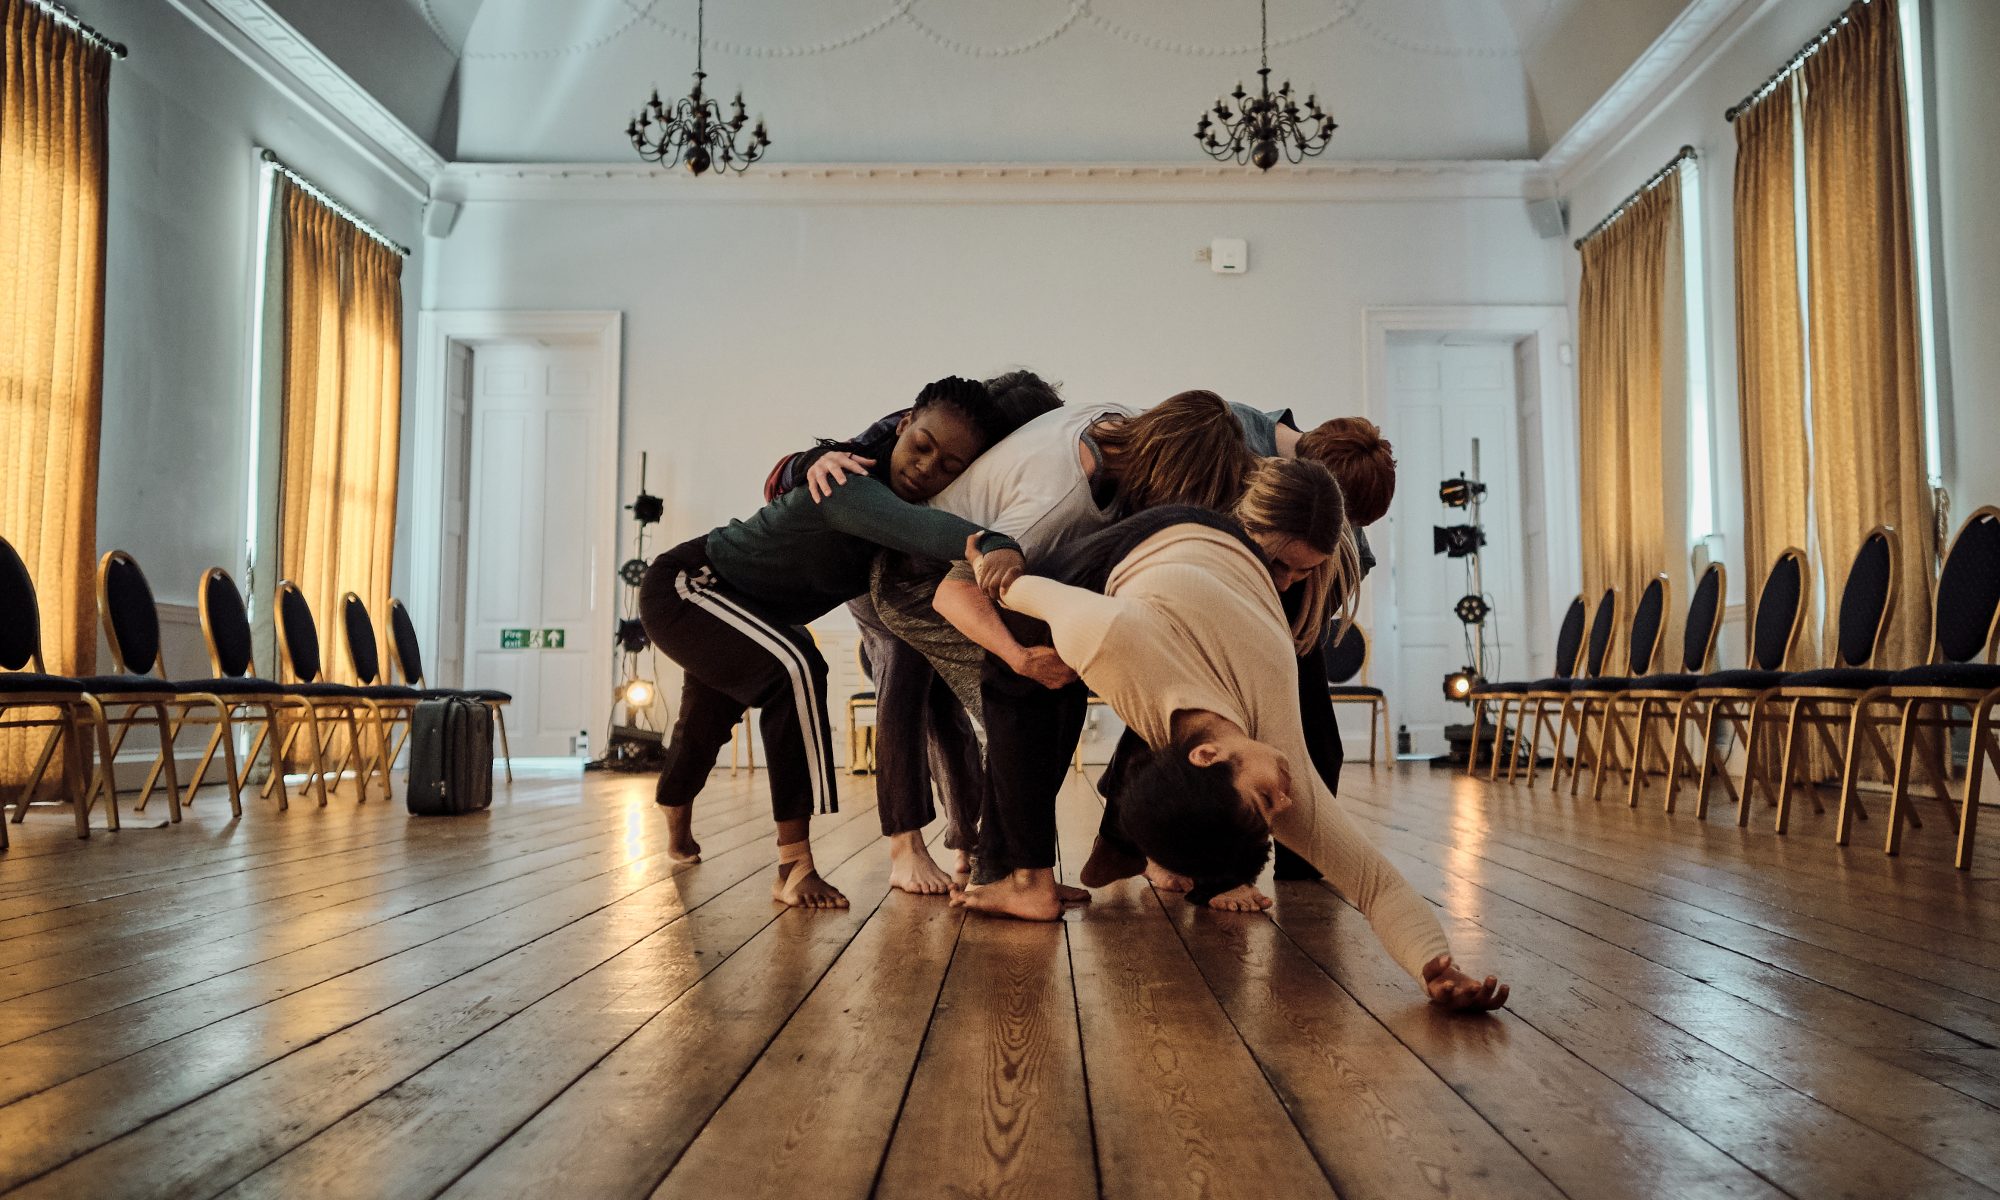 Six dancers rehearsing for HELD 2021 in a large room with wooden floors and chandeliers. One dancer is falling back with their right hand resting on the floor as the other five dancers support them by holding them, stopping them from falling, as they rest their heads on the dancer and eachtother.